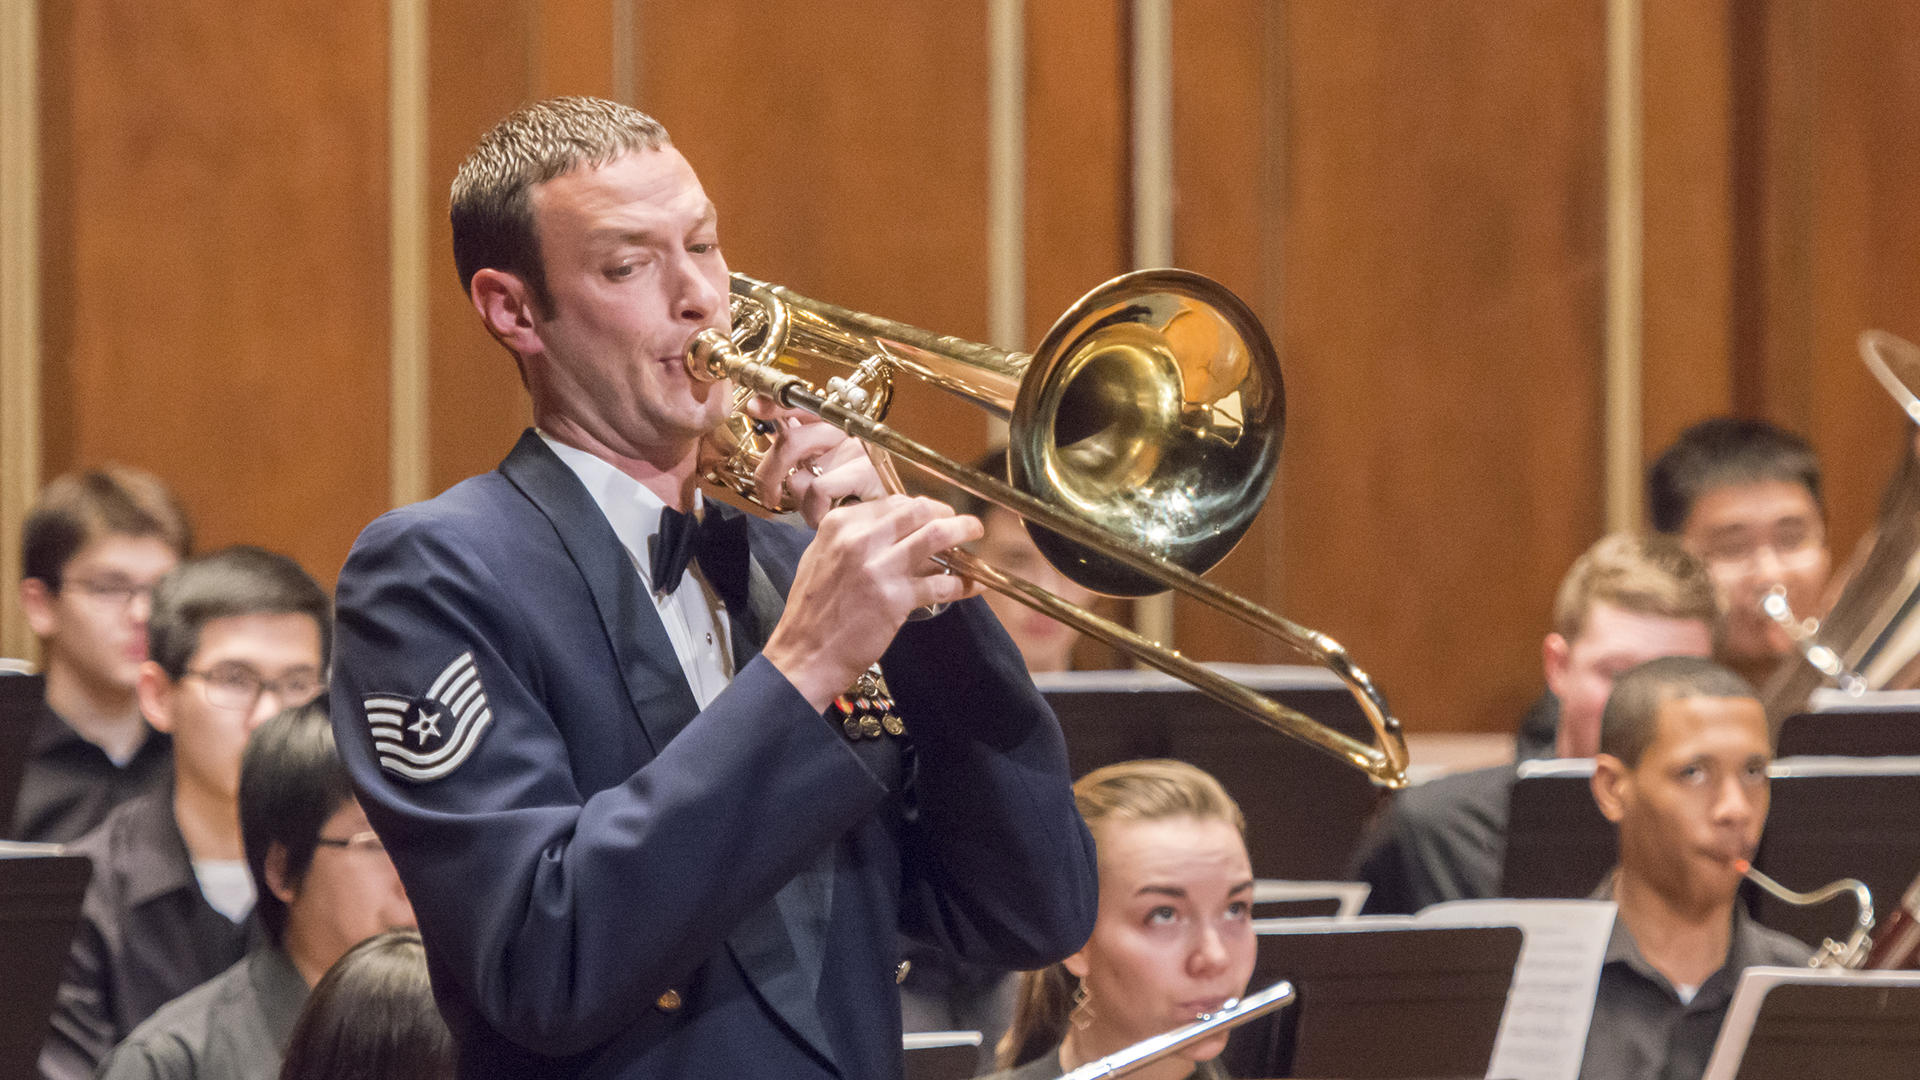 Symphonic Winds perform with guest artist